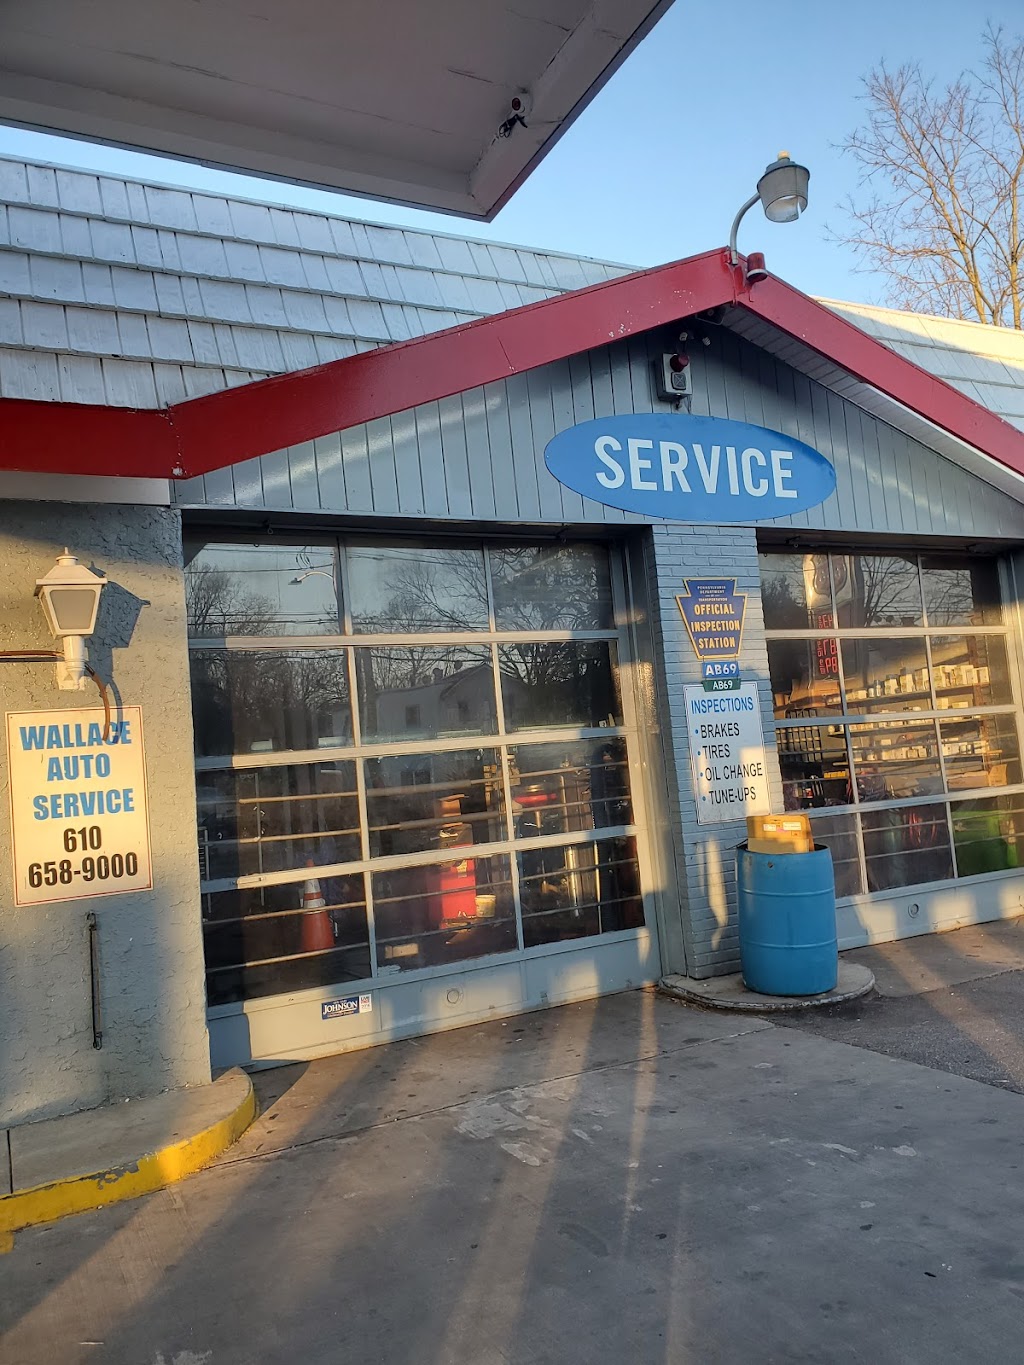 Wallace Auto Service | 700 E Haverford Rd, Bryn Mawr, PA 19010 | Phone: (610) 658-9000